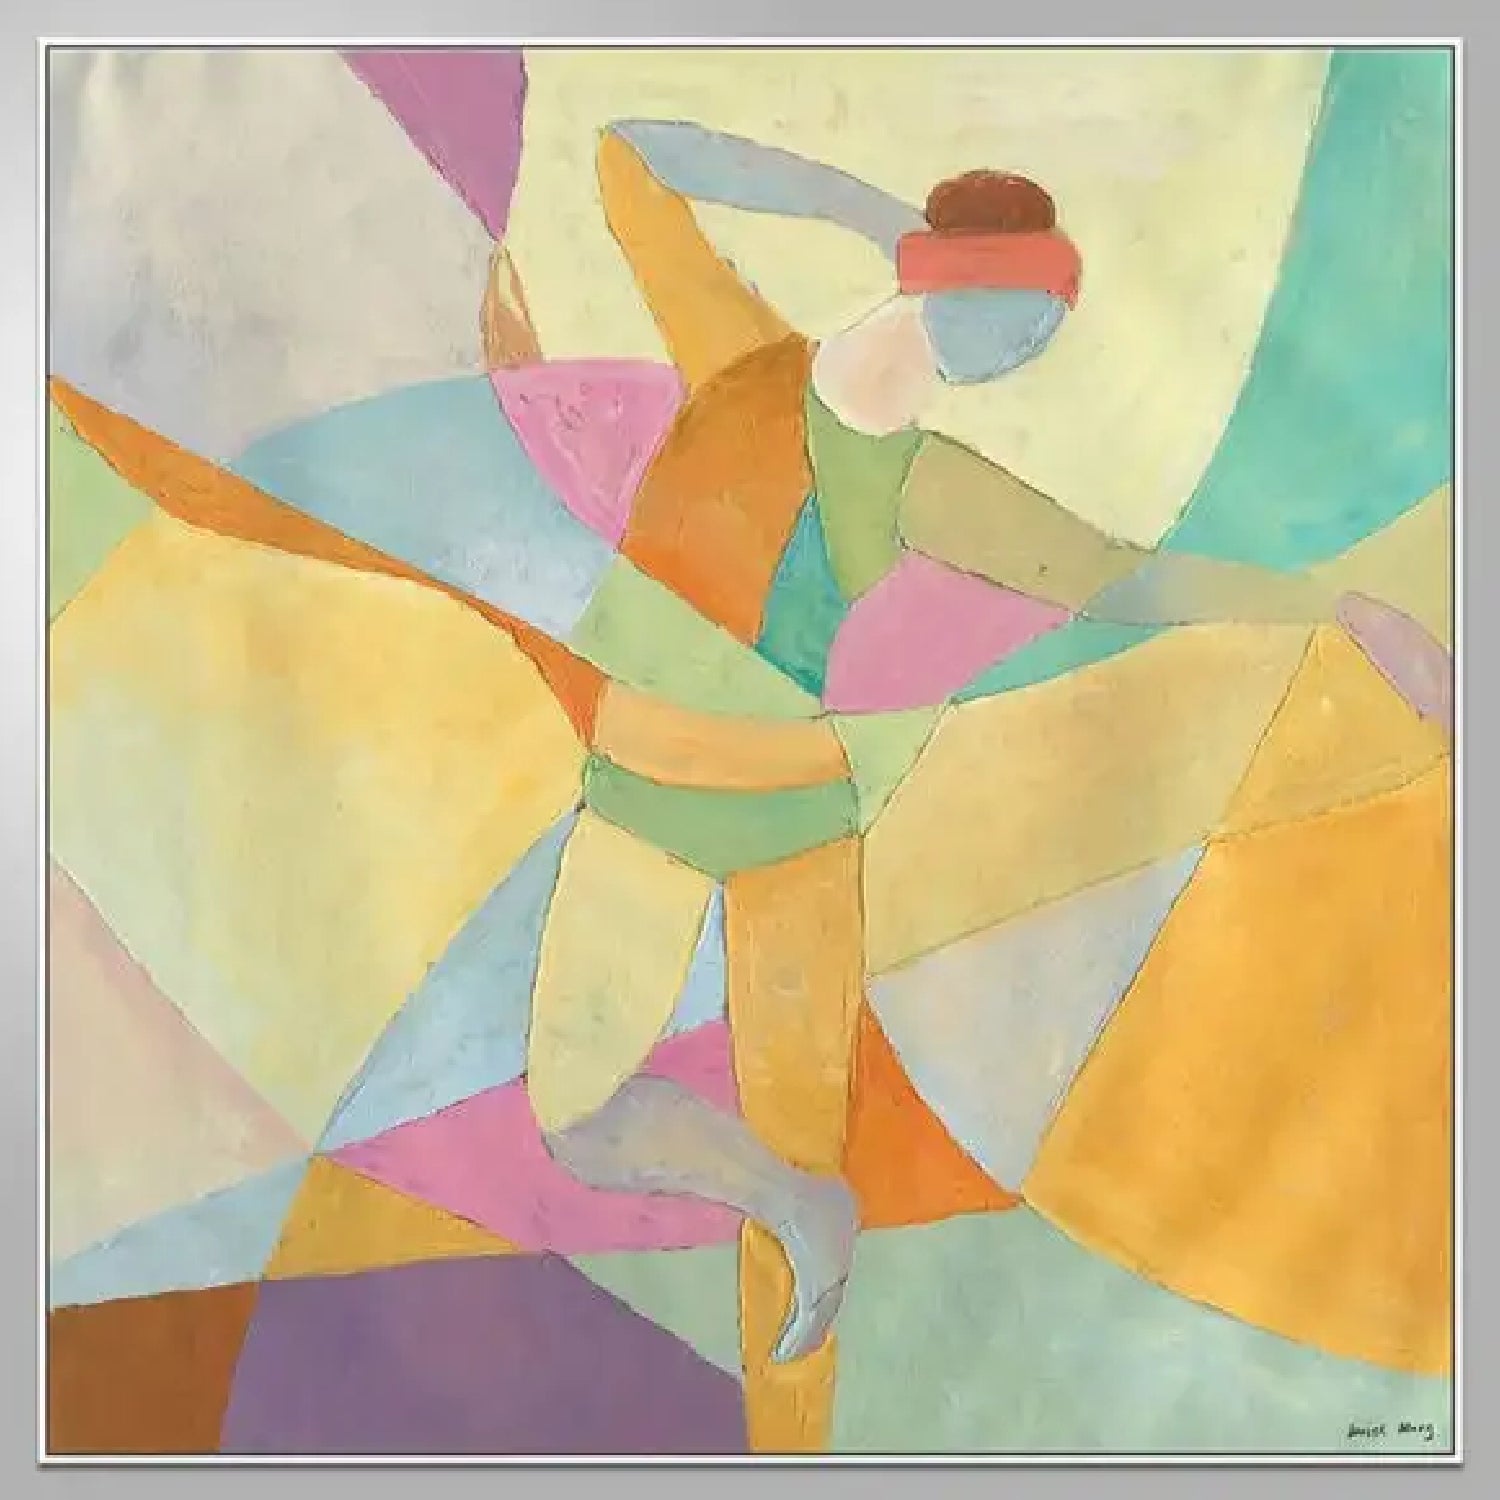 Authentic Abstract Dancer Minimalist Wall Artwork